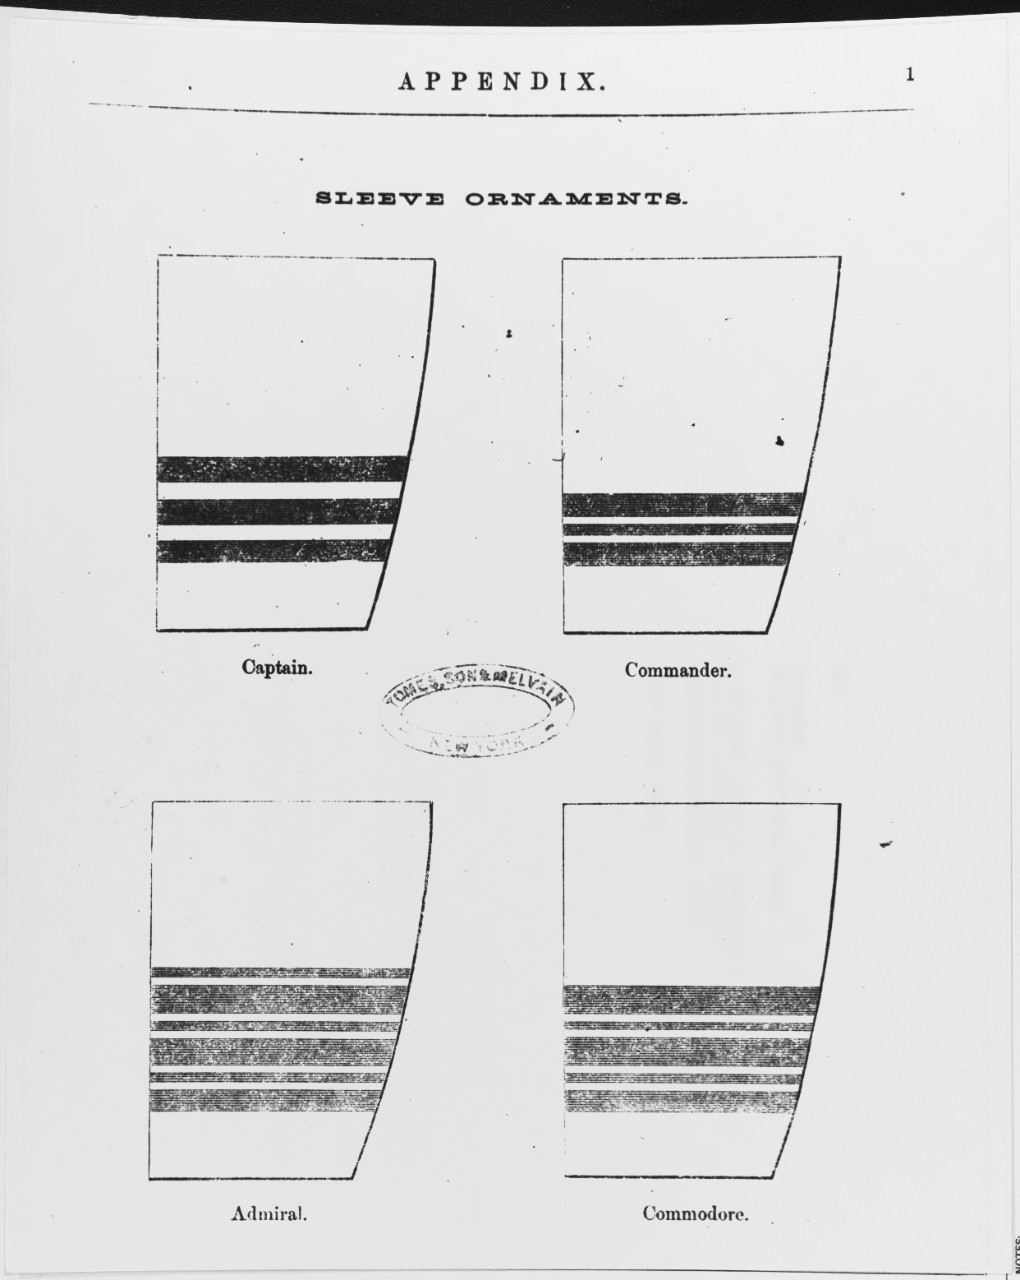 Uniform Regulations, 1862. Sleeve Ornaments for an Admiral, Commodore, Captain, and Commander